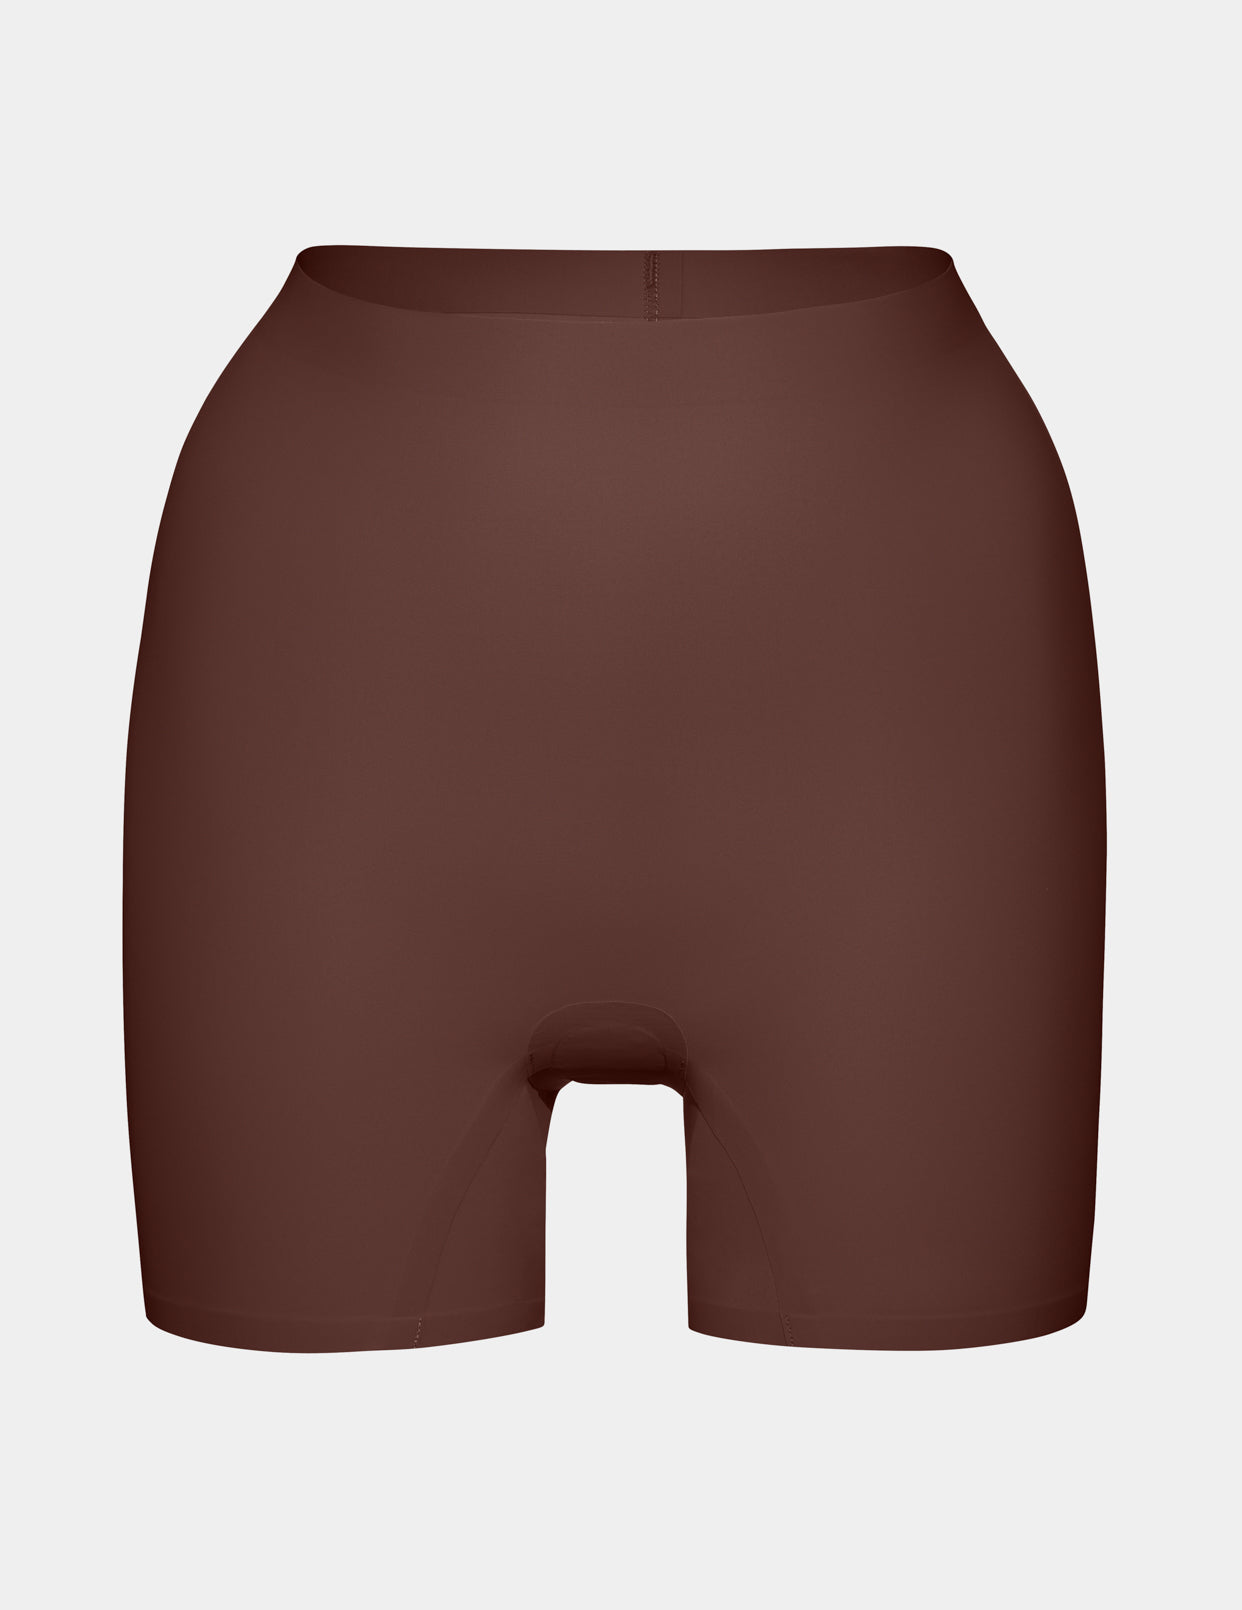 I found life changing leakproof and thigh chafing shorts!!! @knix